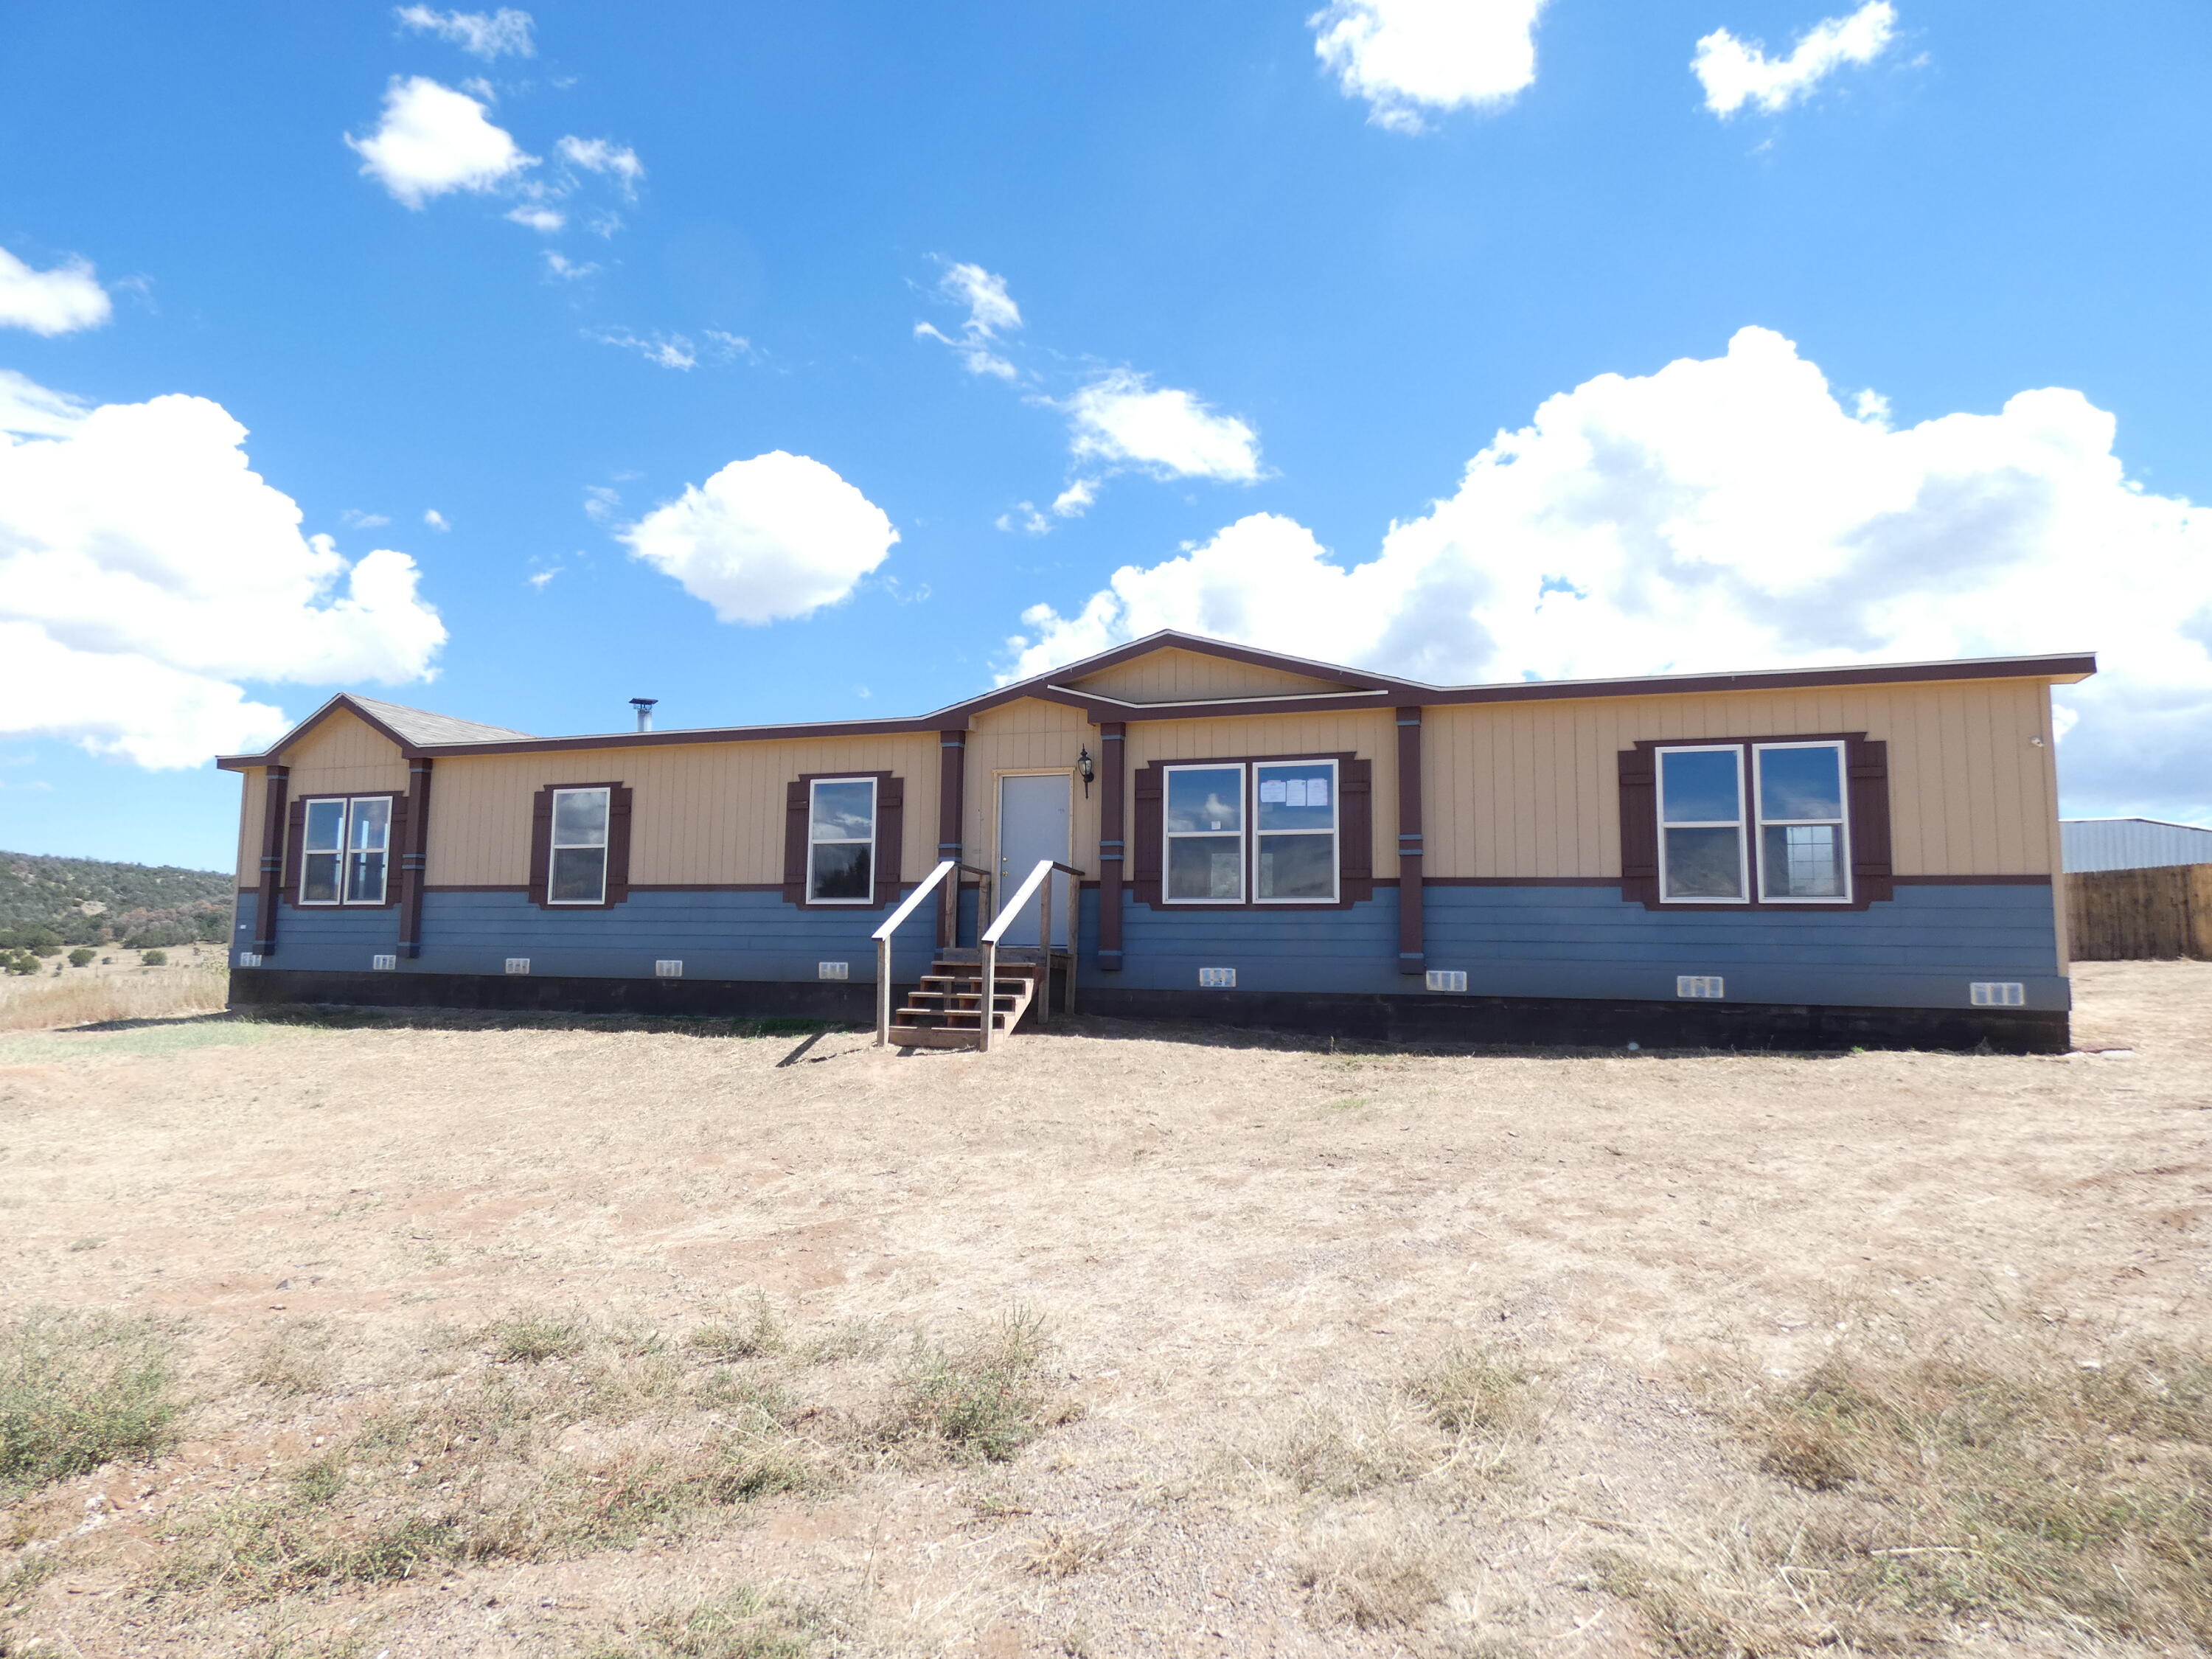 Spacious 4 bedroom, 2 bath manufactured home on 2.5 acres.  Close proximity to I-40. Home is eligible for $100 down payment program when using FHA 203 (b) or 203 (k) financing.